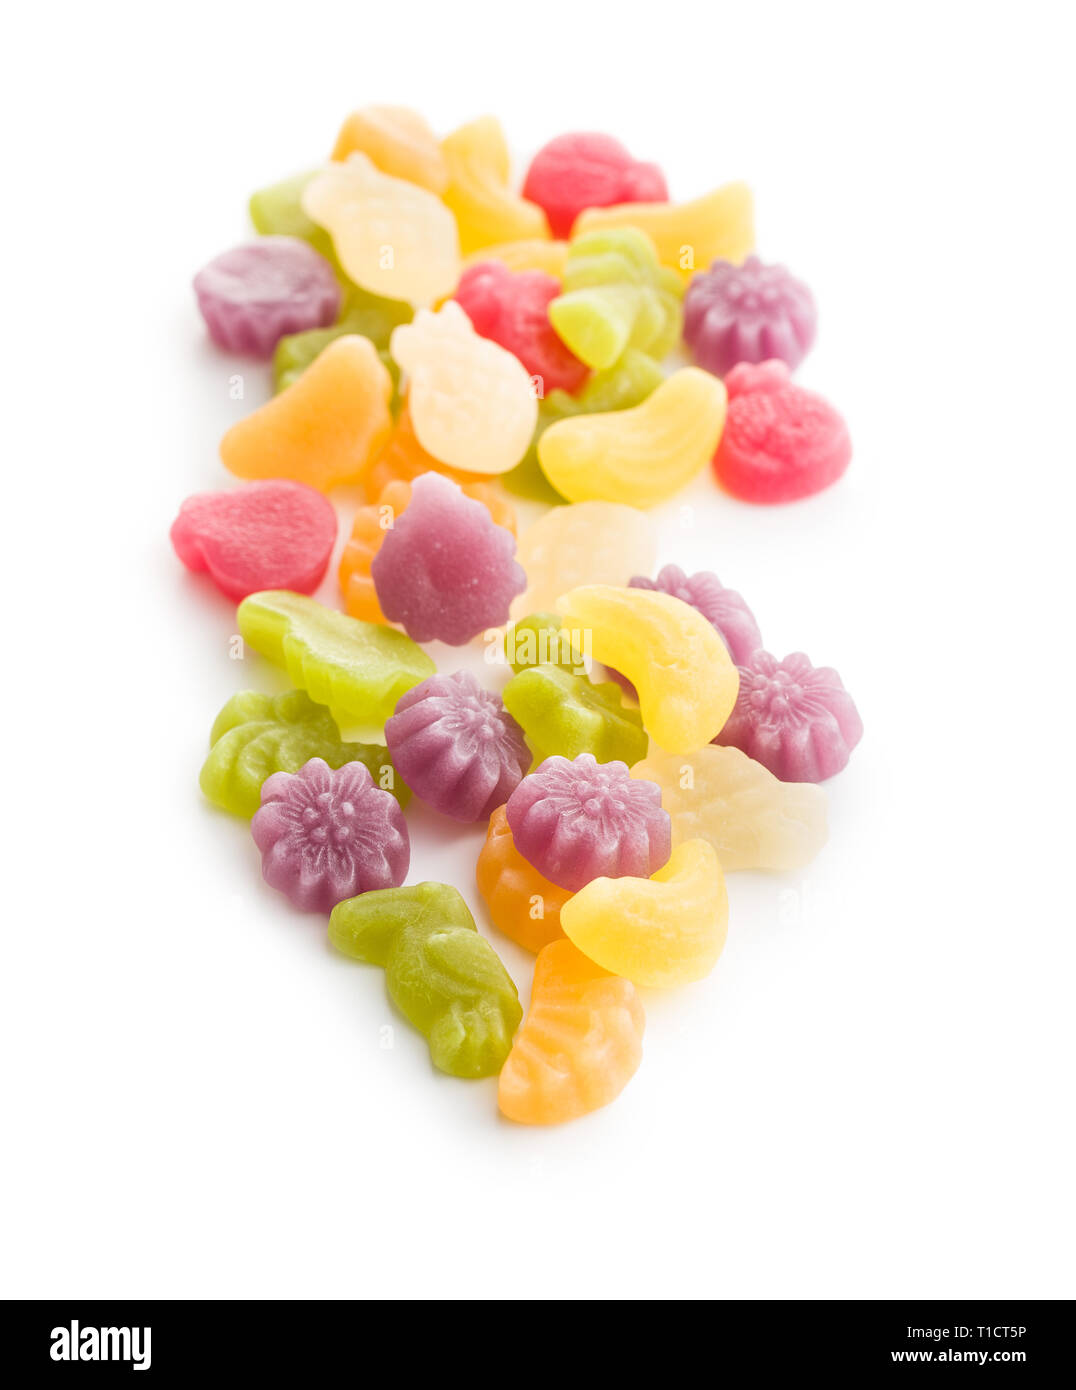 Fruit jelly candies isolated on white background. Stock Photo